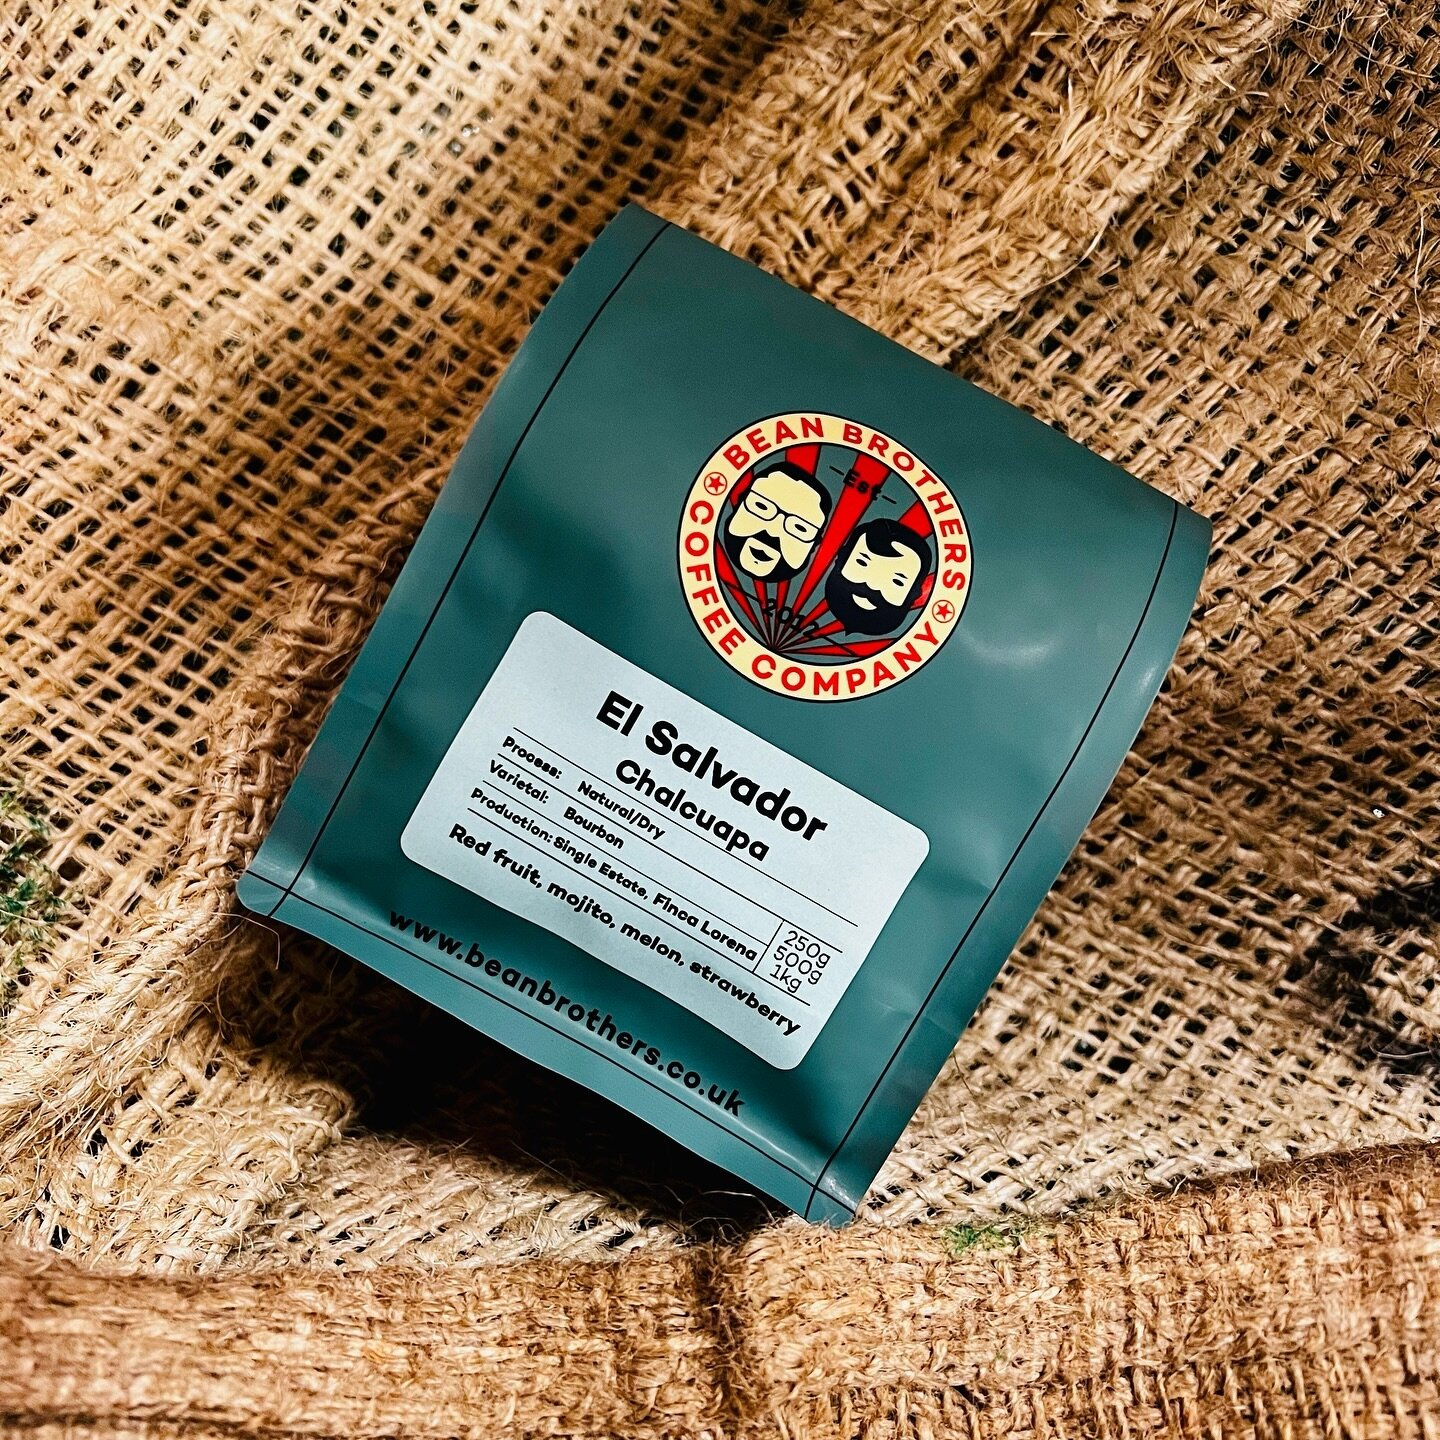 New coffee has just dropped on the website! Just in time for Valentine&rsquo;s day! 🩵🫘

And there might be an e-mail waiting from us if you are a subscriber&hellip; 😉

#beanbrothers #beanbrothersroastery #beanbrothershuddersfield #roastery #coffee